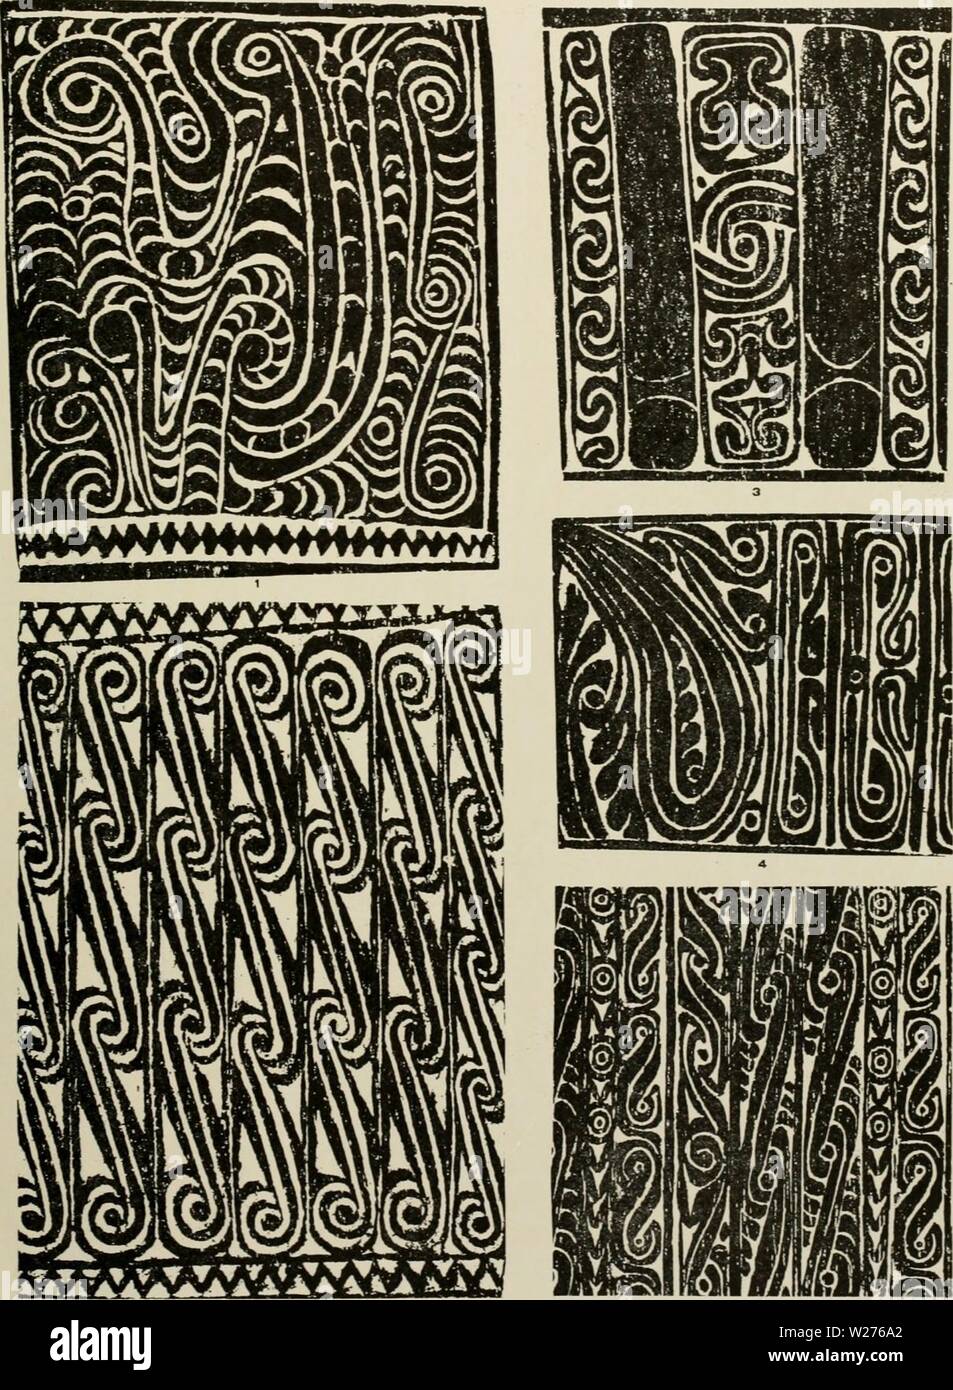 Archive Image From Page 42 Of Decorative Art Of New Guinea Decorative Art Of New Guinea Incised Designs Decorativeartofn04lewi Year 1925 Field Museum Of Natural History Anthropology Design Series No 4 Plate